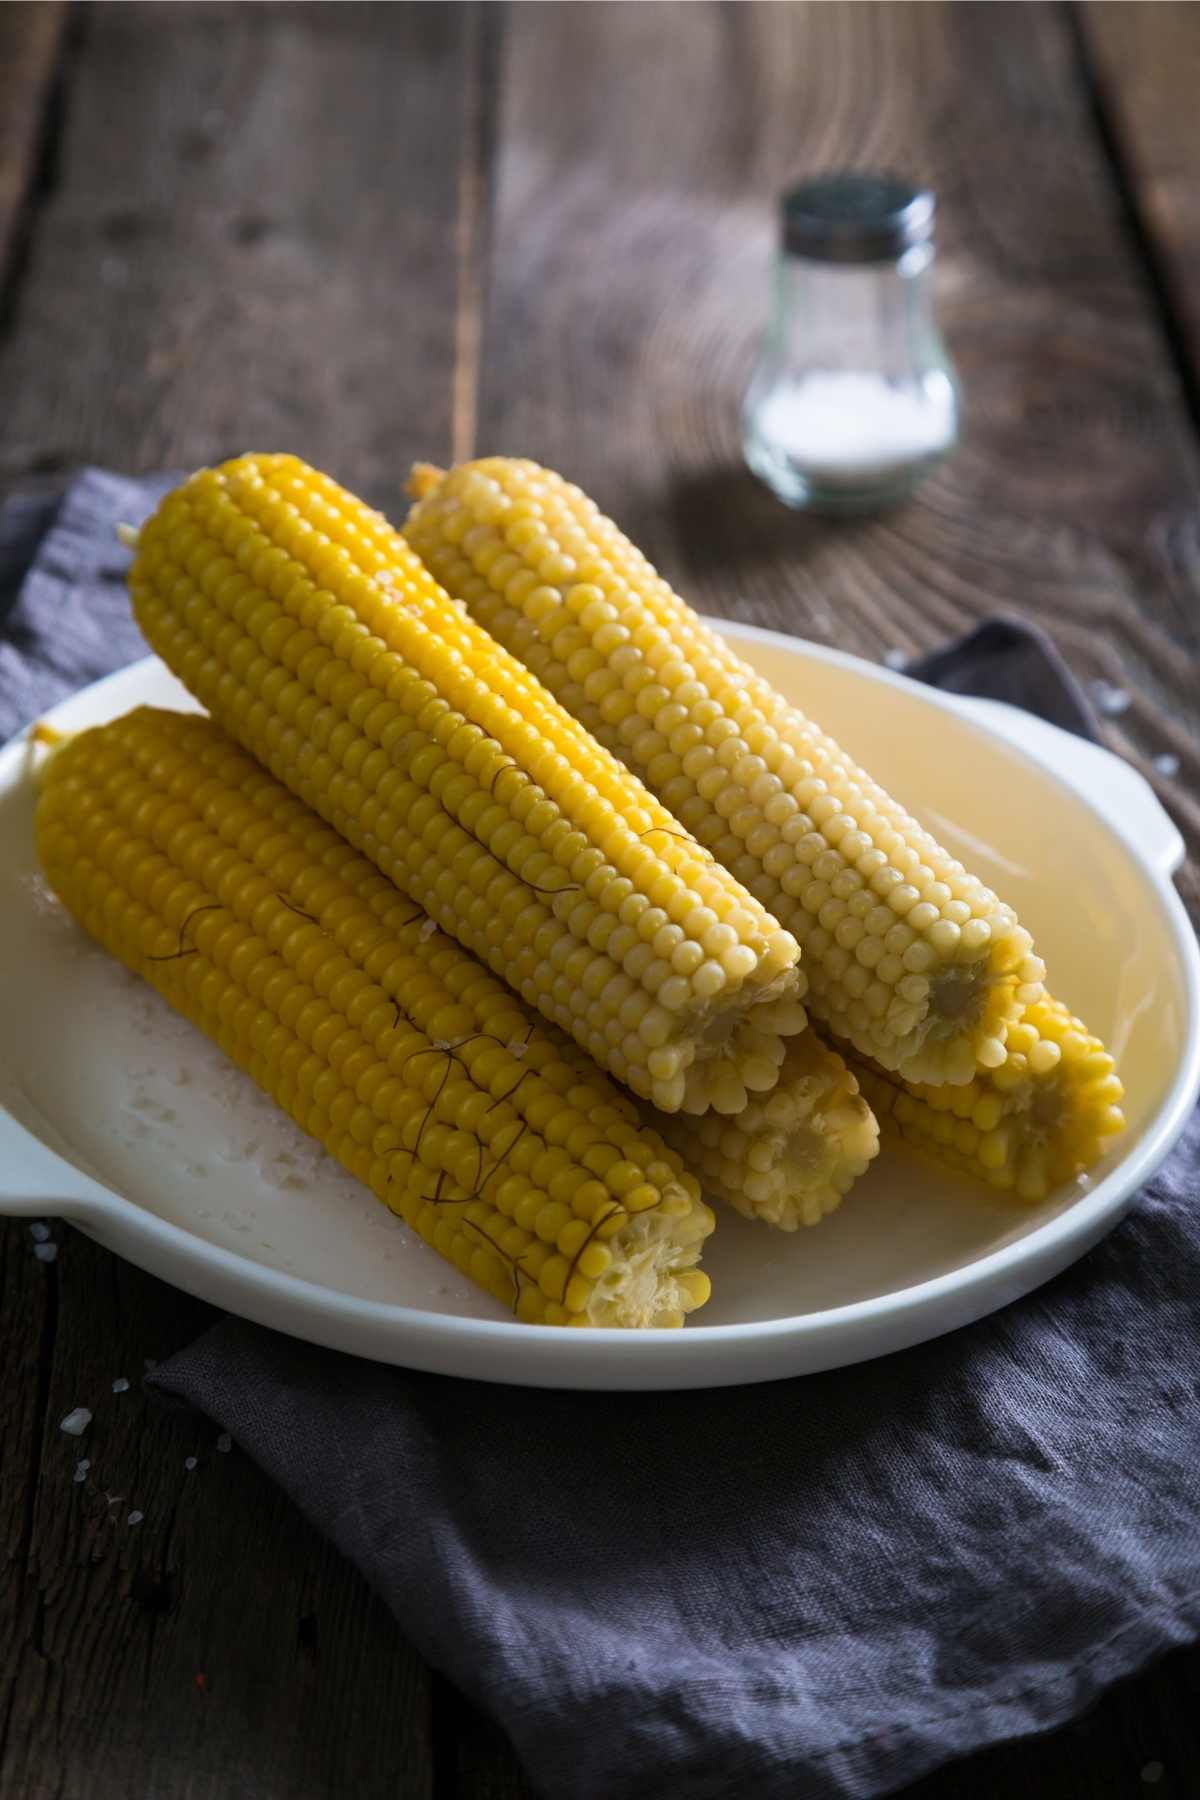 If you’re not familiar with cooler corn, this post covers everything you need to know. It’s a convenient way to cook corn on the cob in a cooler!